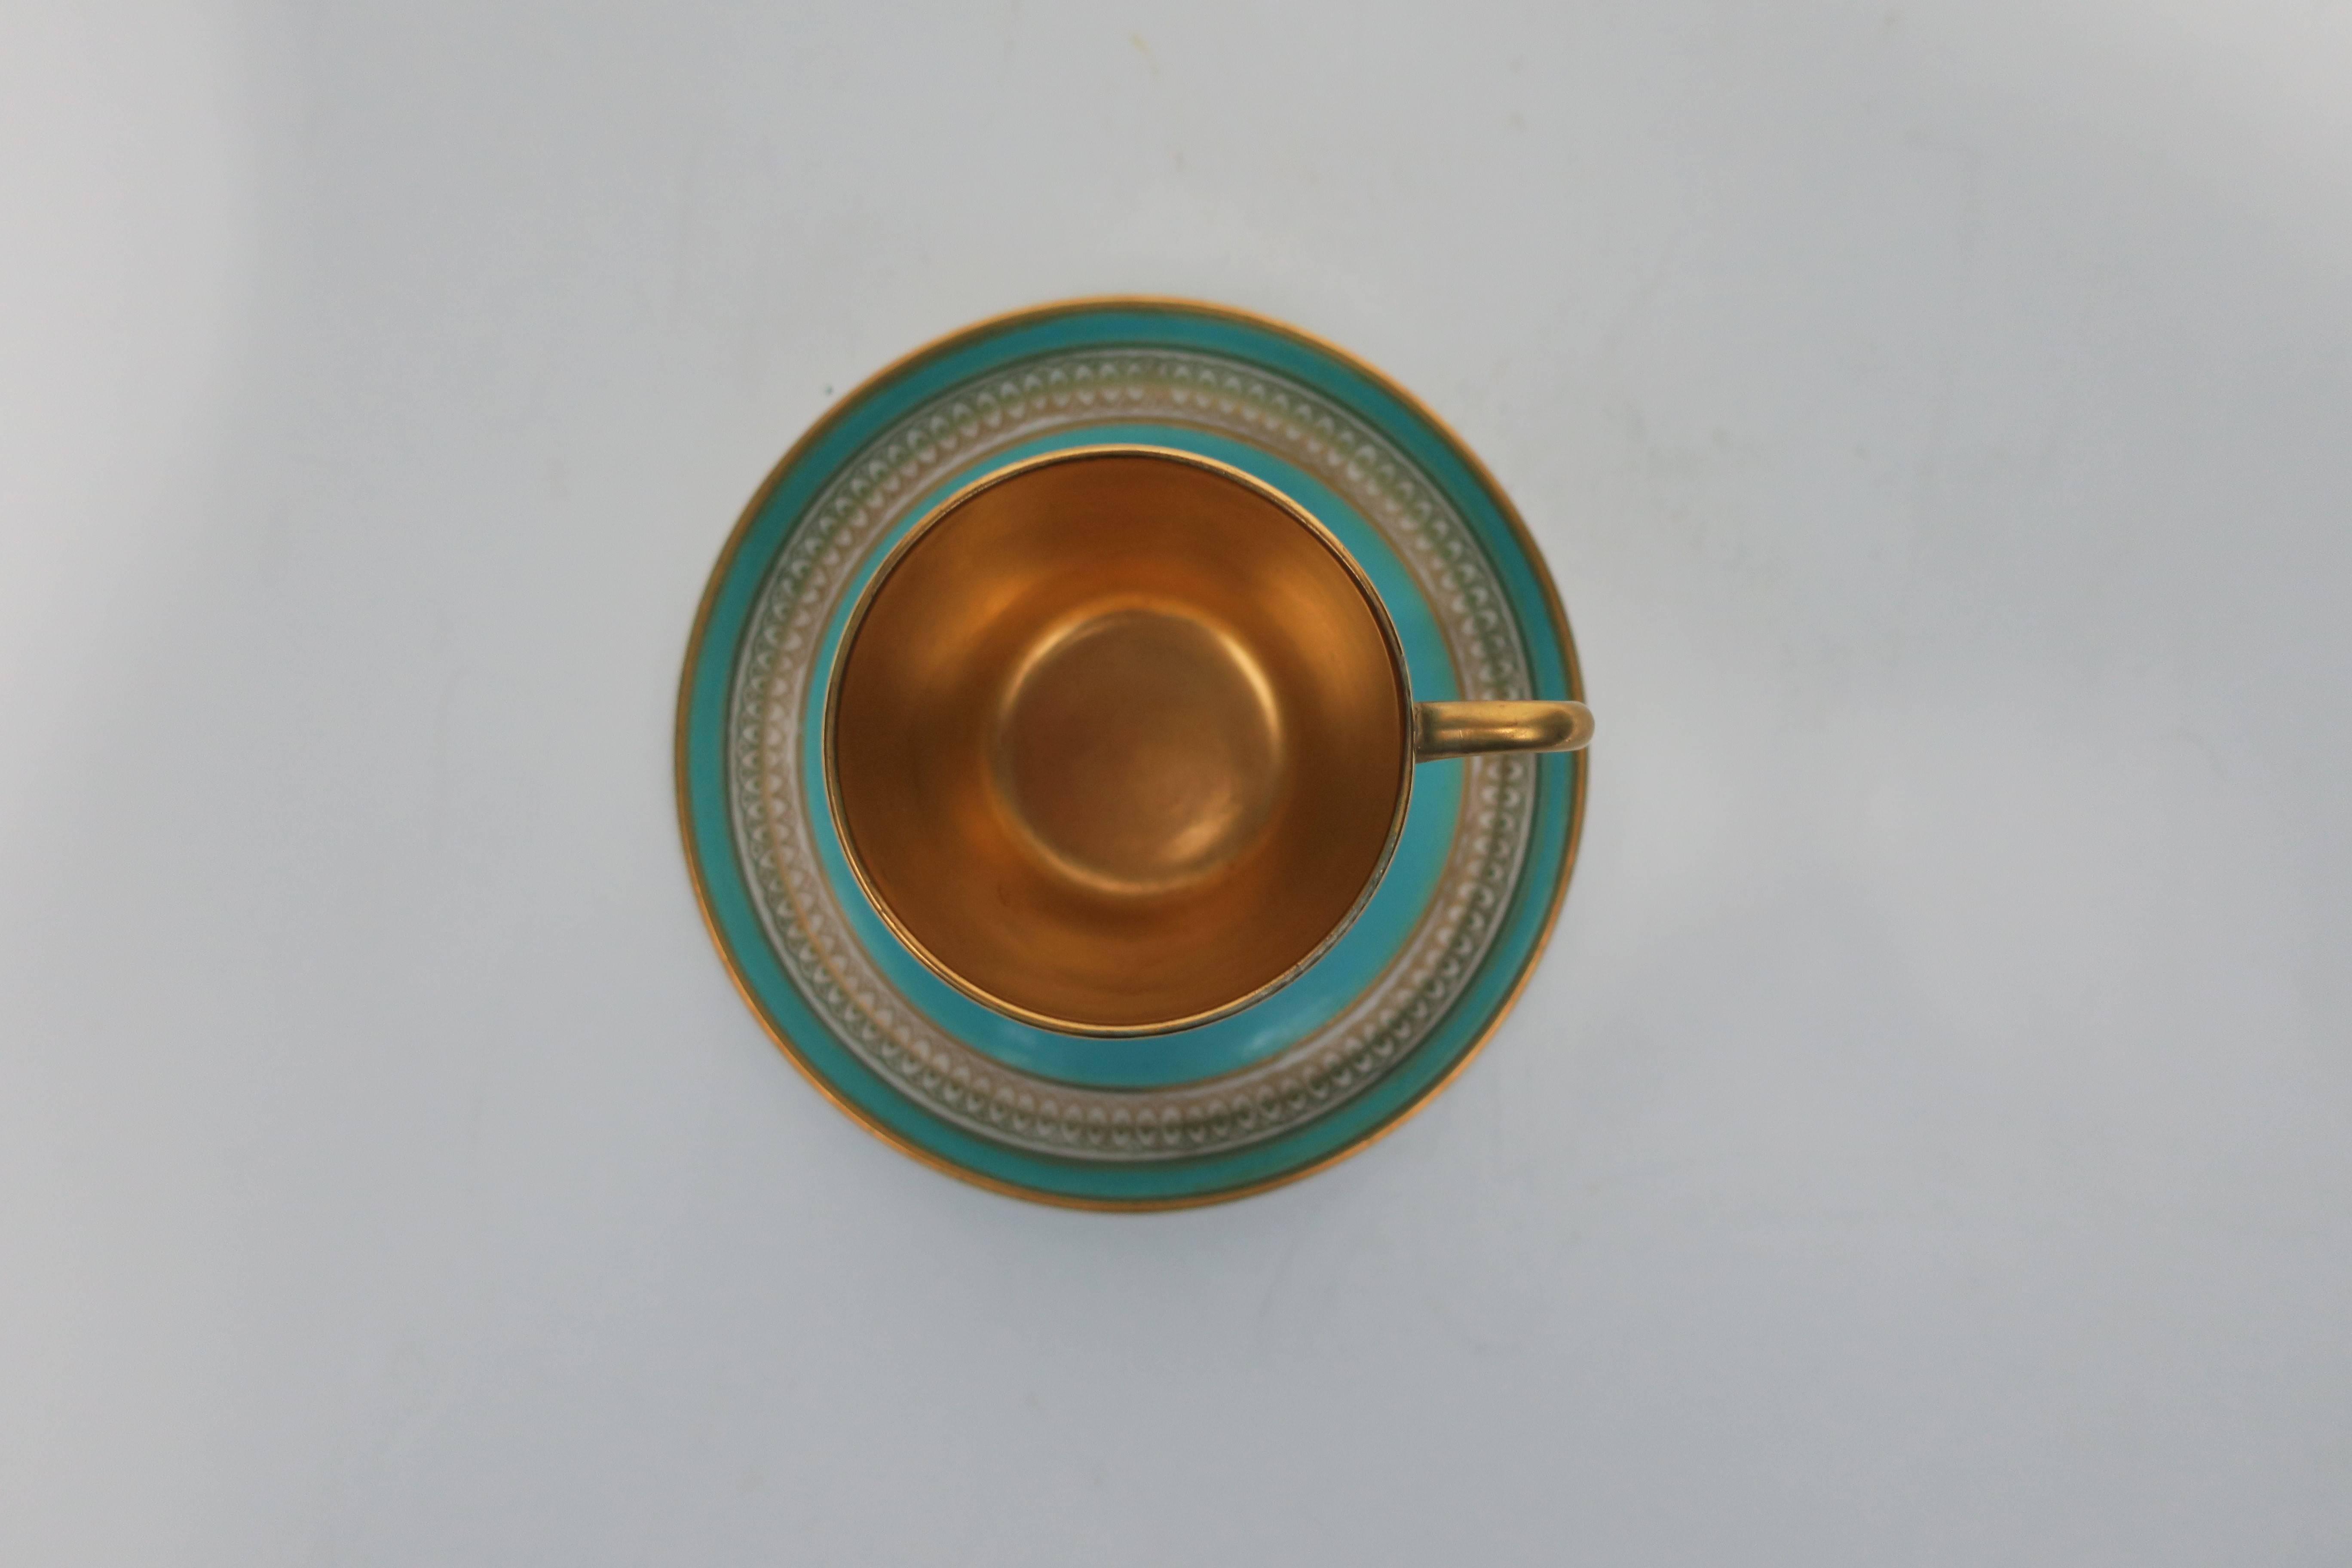 English 24-Karat Gold, Blue and White Espresso Coffee Cup  2